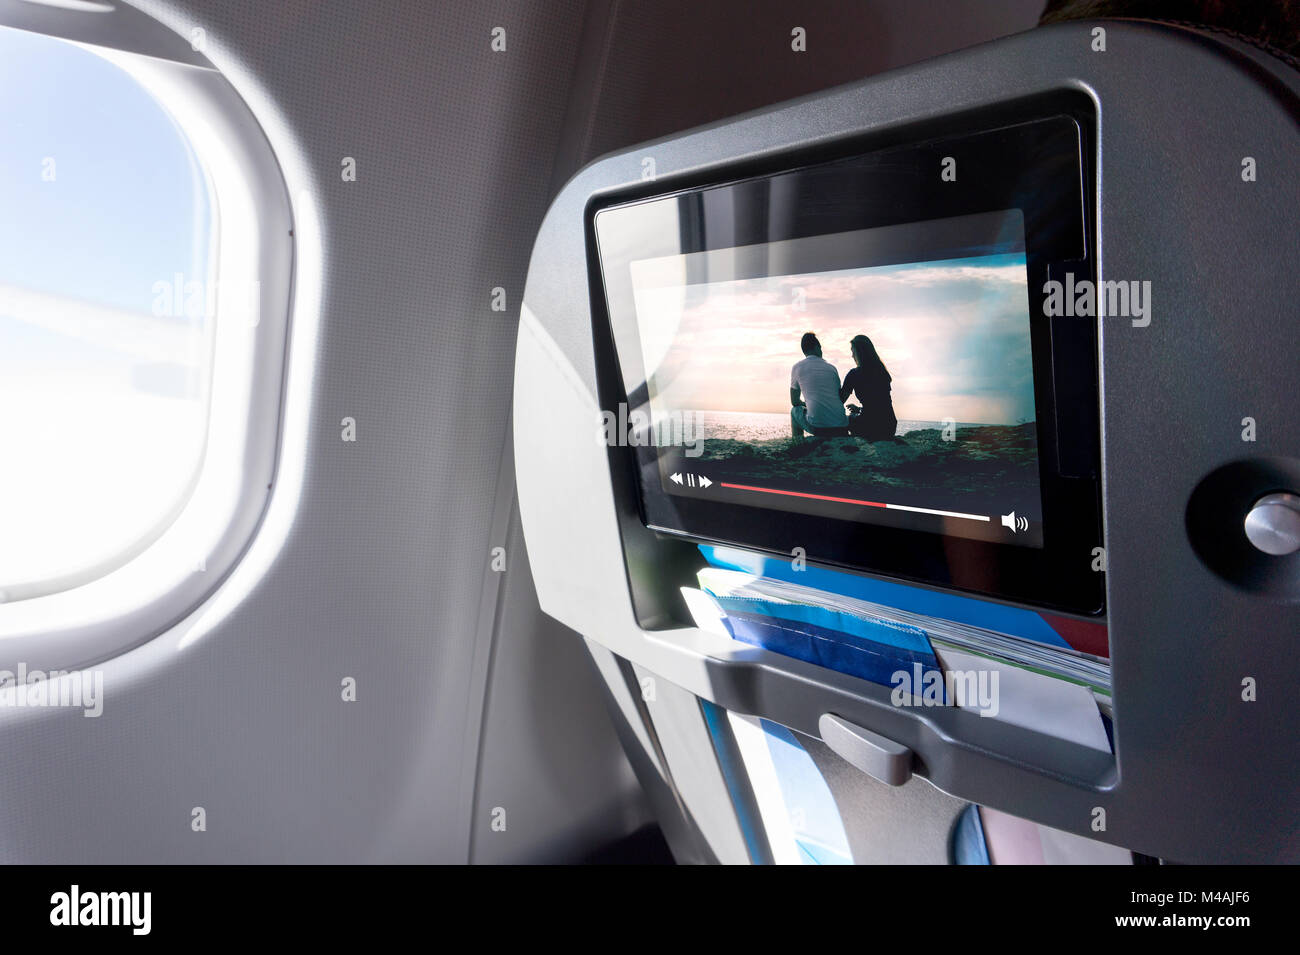 Watching movie on an airplane touch screen. Imaginary film playing on a video player in monitor during long flight. Entertainment service system. Stock Photo